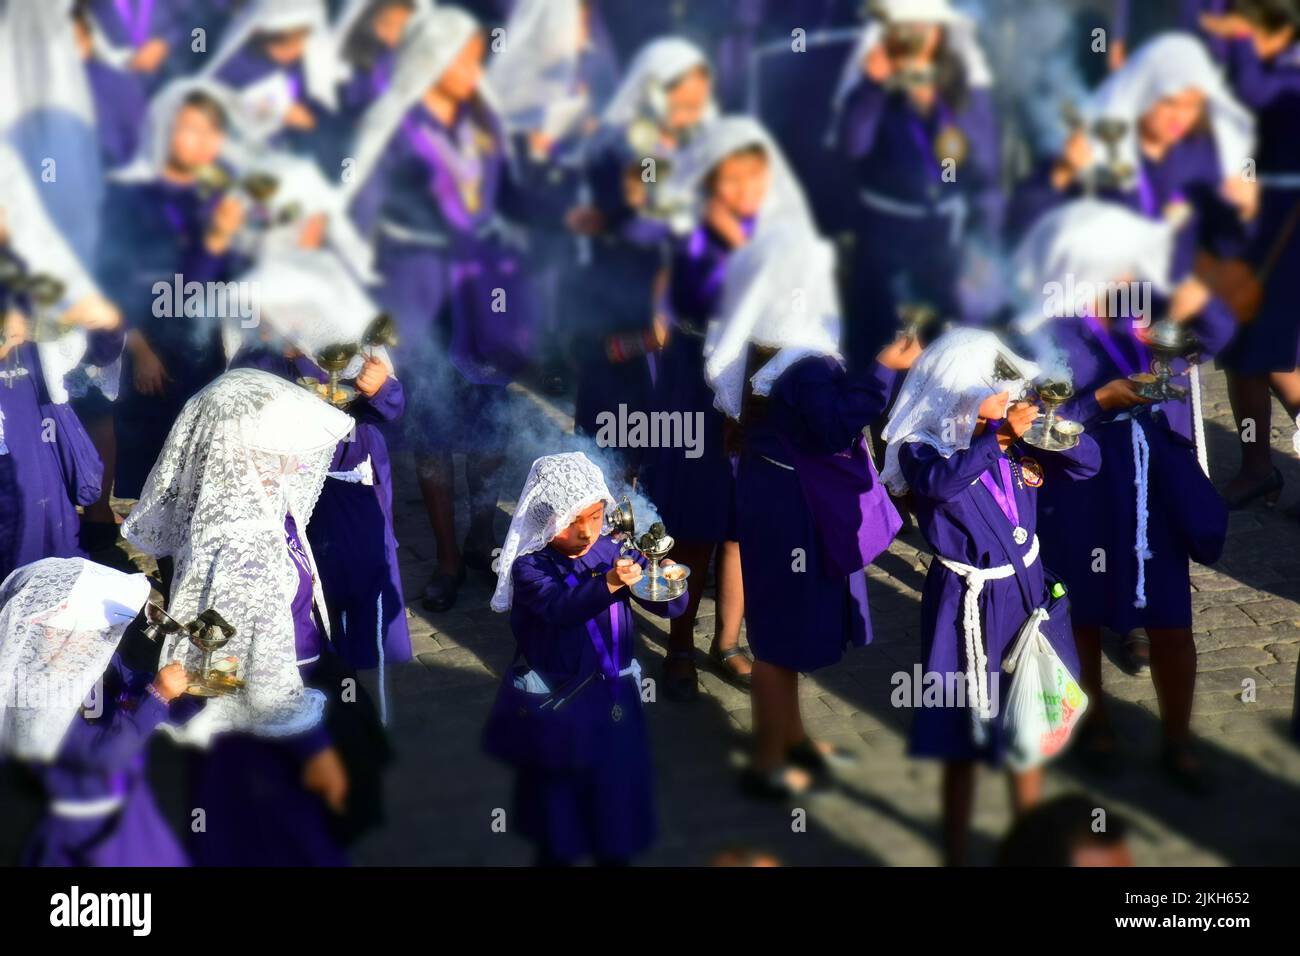 Arequipa, Peru. September 2018, Young girls in traditional clothing during Religious celebration near the main square of the city. Stock Photo